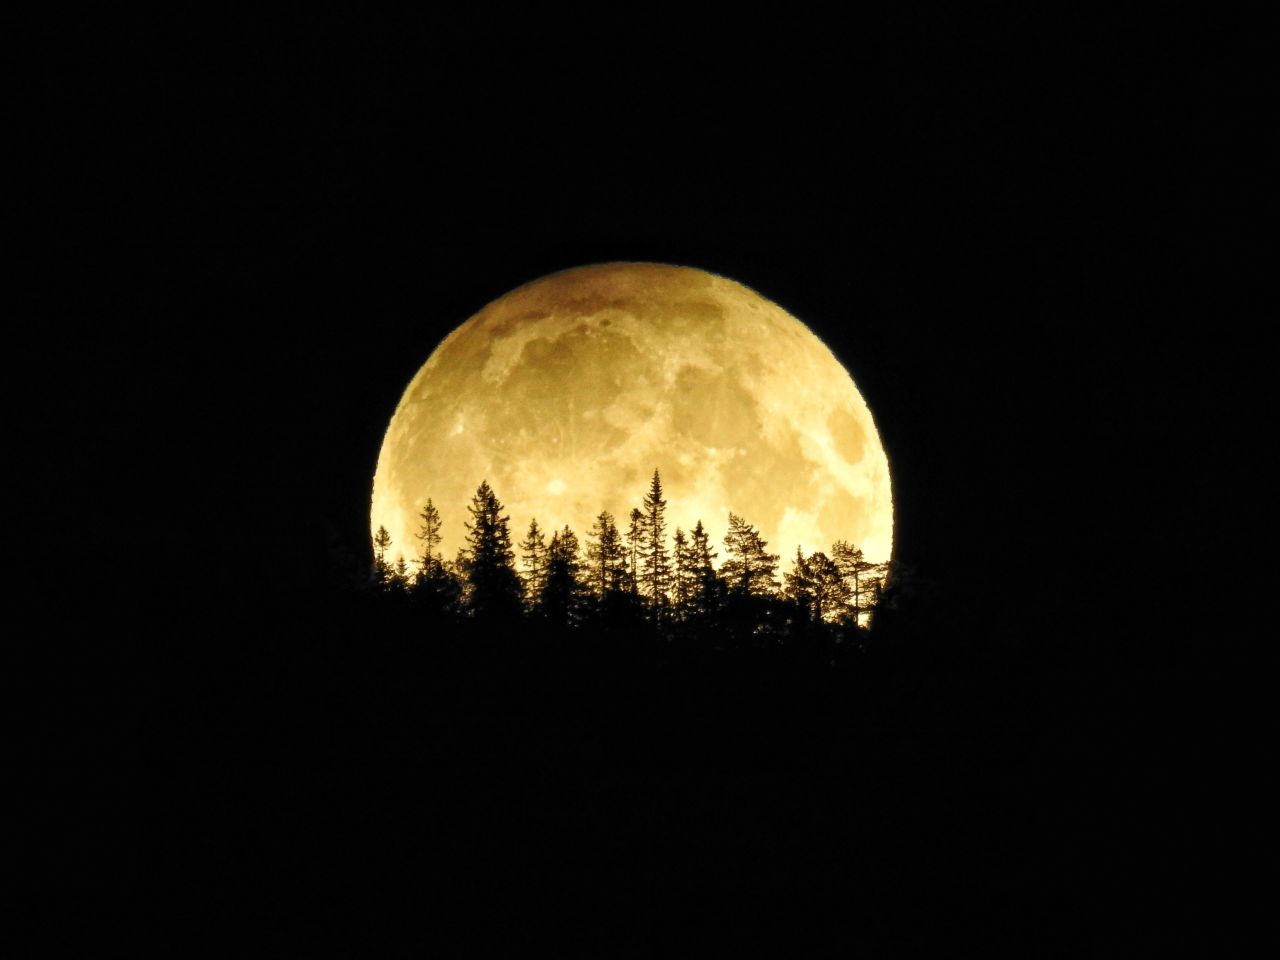 A luminous harvest moon has stargazers under its spell. Lisbett Lindstad caught this image early Saturday, September 17, in Vikersund, Norway.